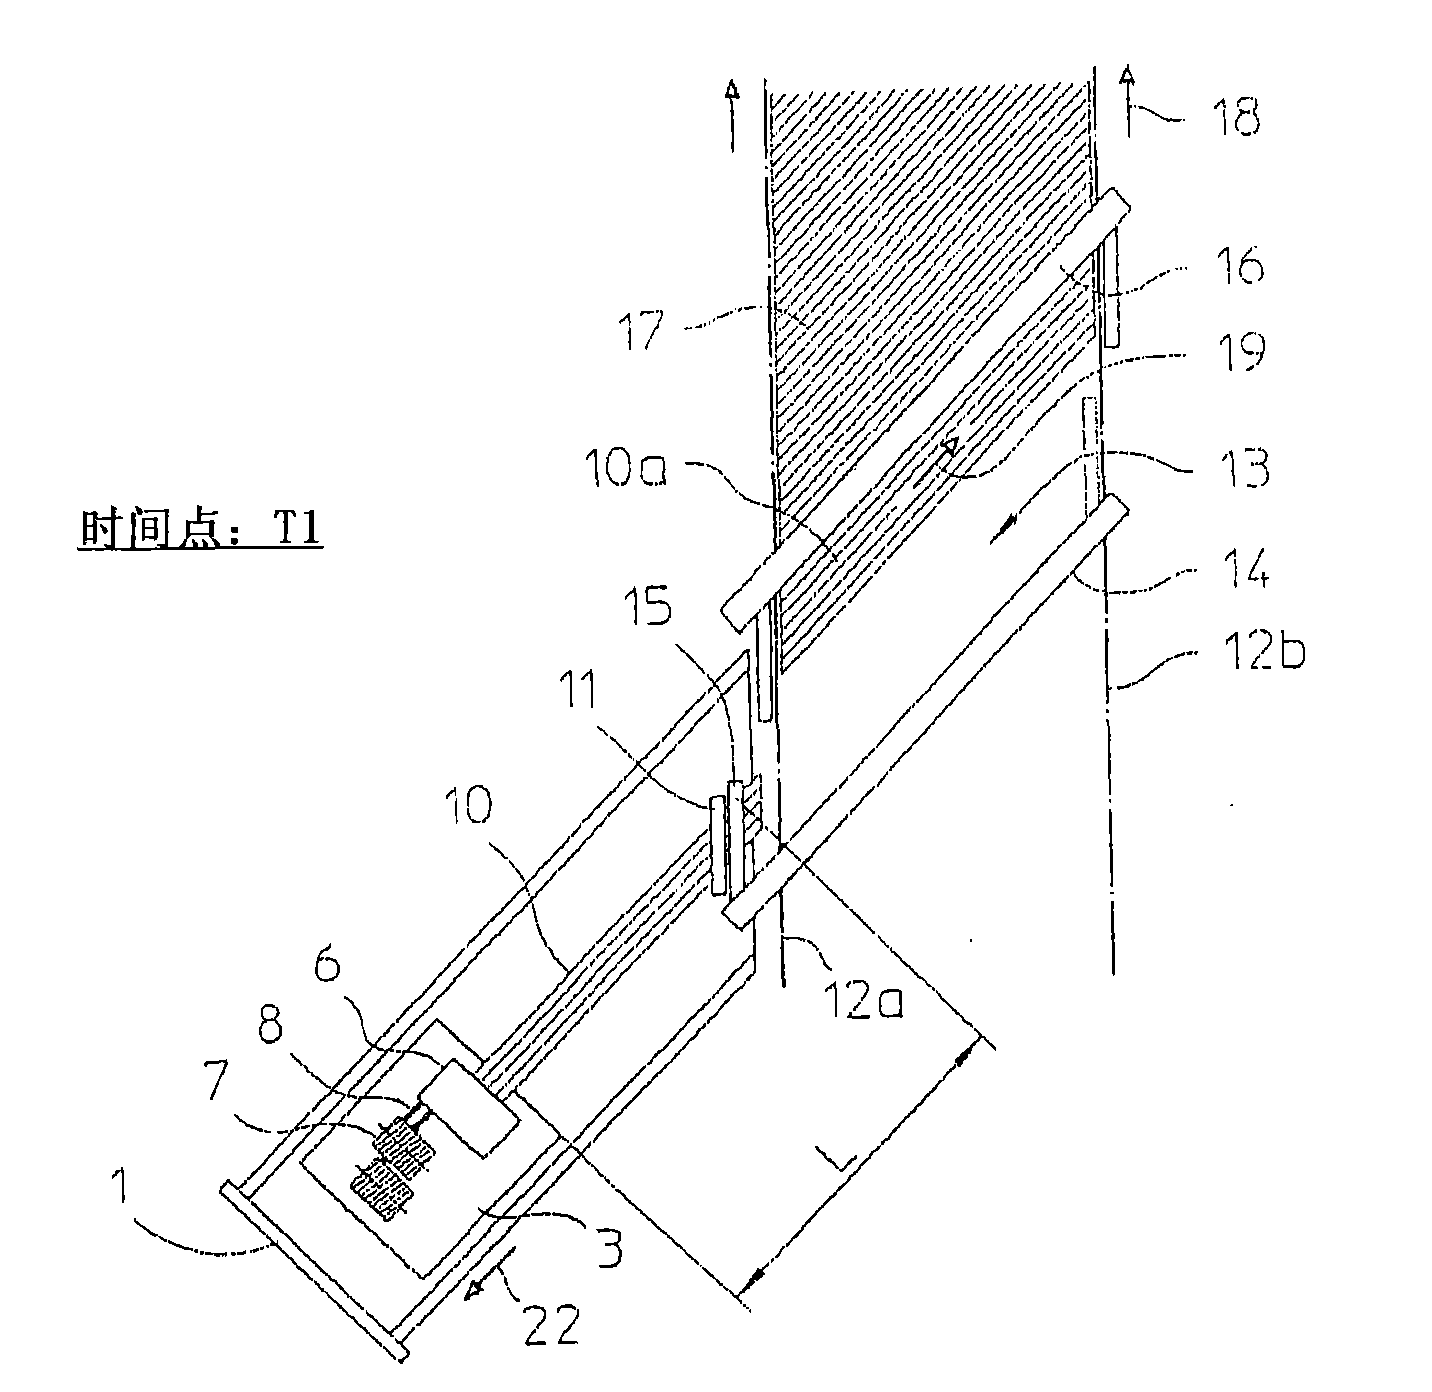 Method and device for creating a unidirectional fibre layer, method for manufacturing a multi-axial layed fabric and a multi-axial machine as well as a method for manufacturing a woven cloth and weavi